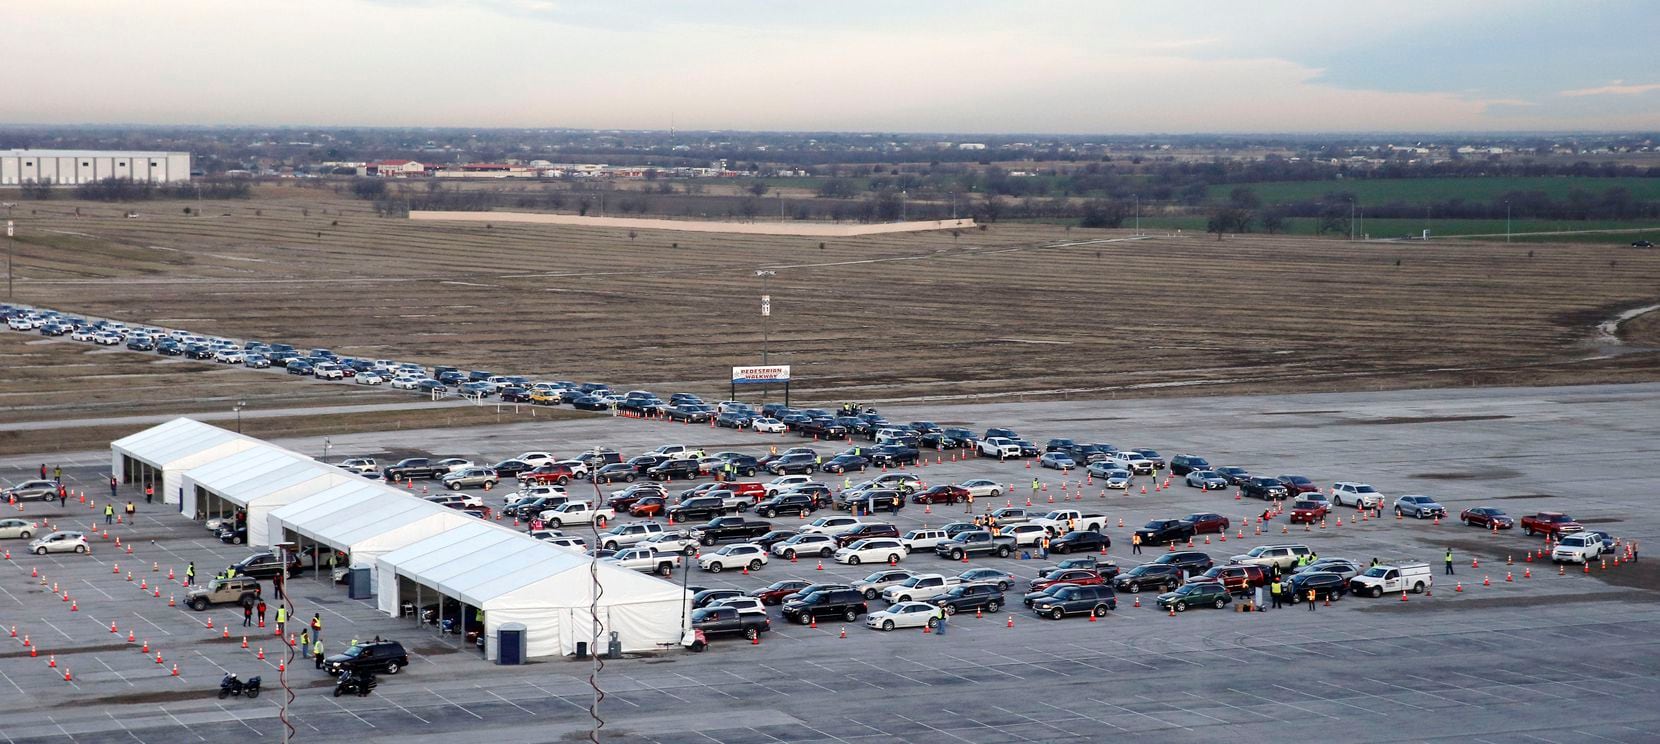 Vehicles make their way through multiple stations at a COVID-19 drive-through vaccination clinic at Texas Motor Speedway on Tuesday, February 2, 2021in Fort Worth. Denton County medical personnel plan to vaccinate 10,000 residents per day. (Vernon Bryant/The Dallas Morning News)